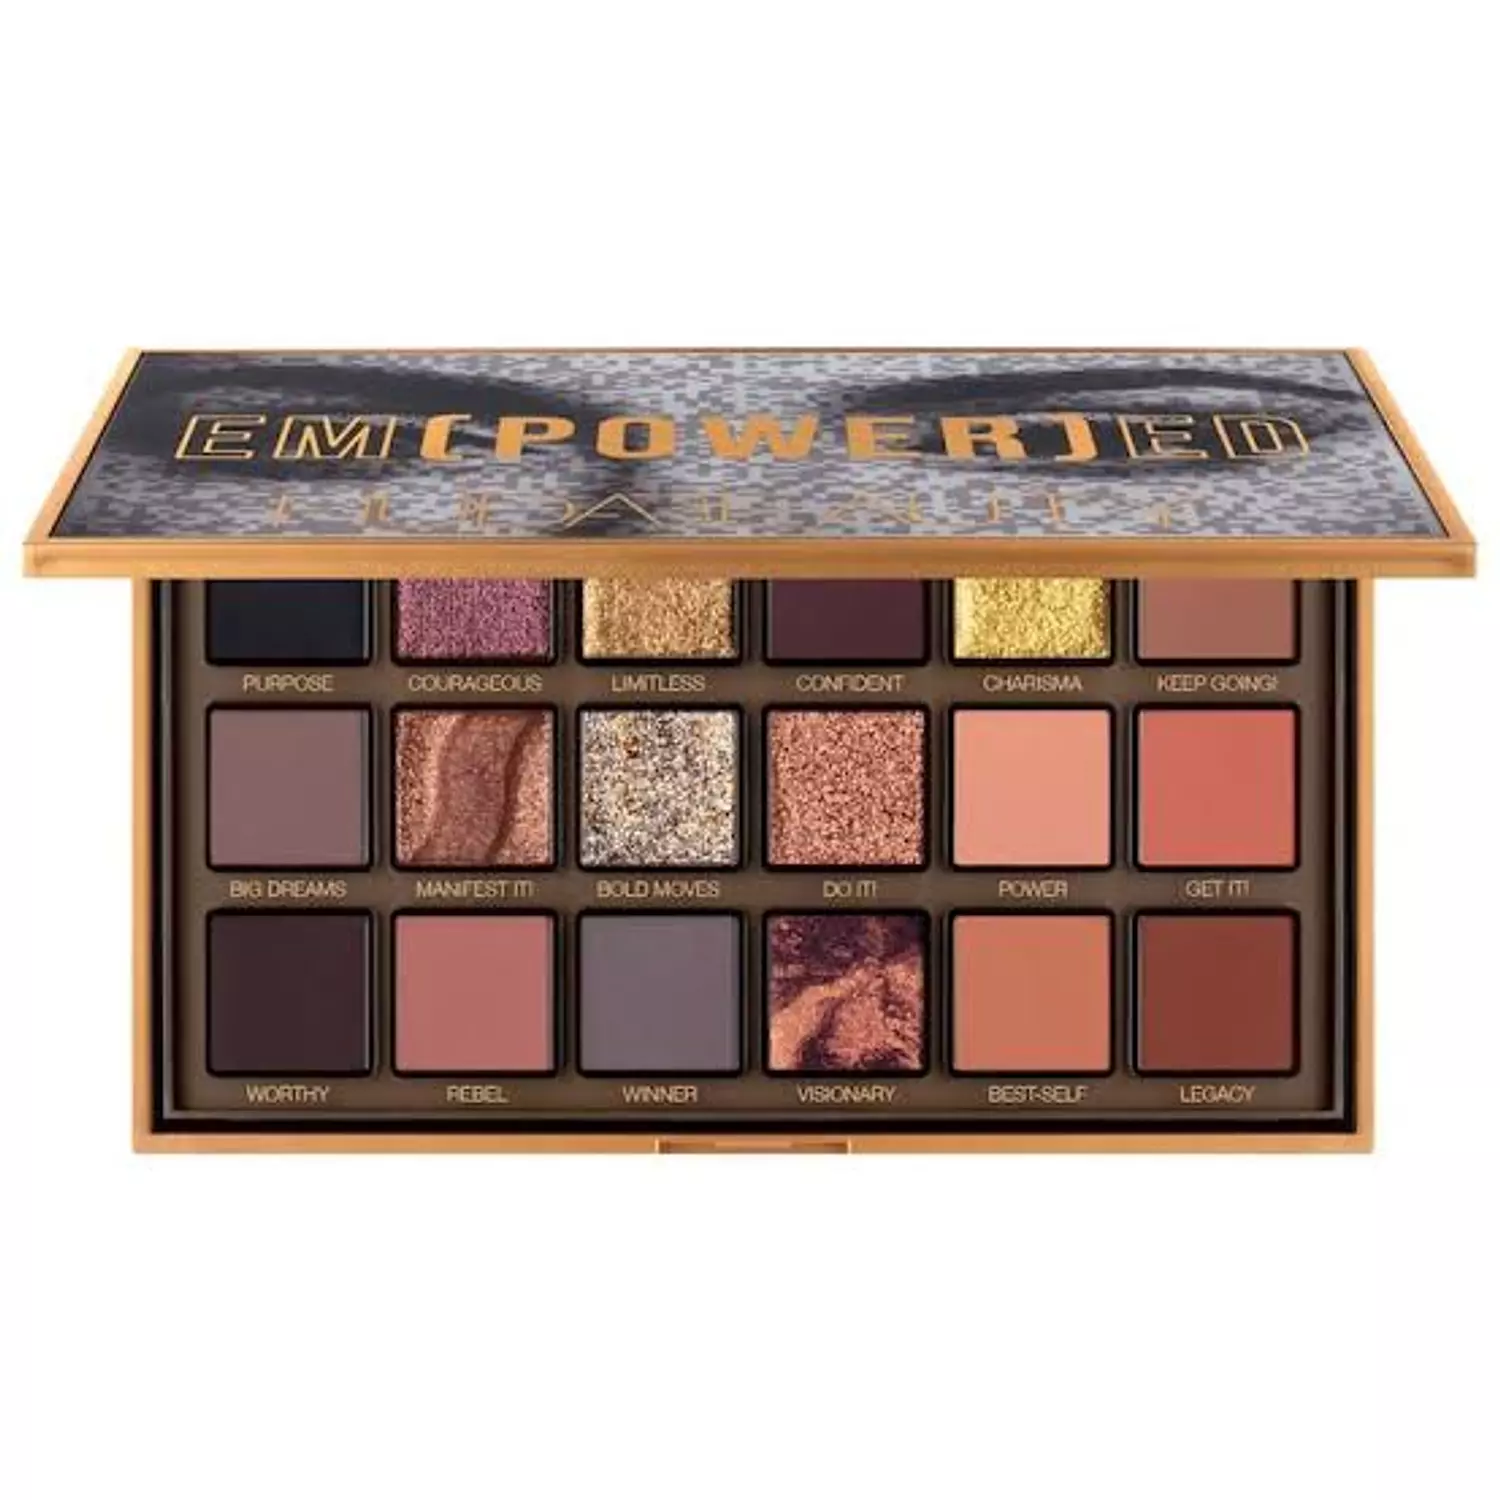 EMPOWERED EYE SHADOW PALETTE | HUDA BEAUTY hover image